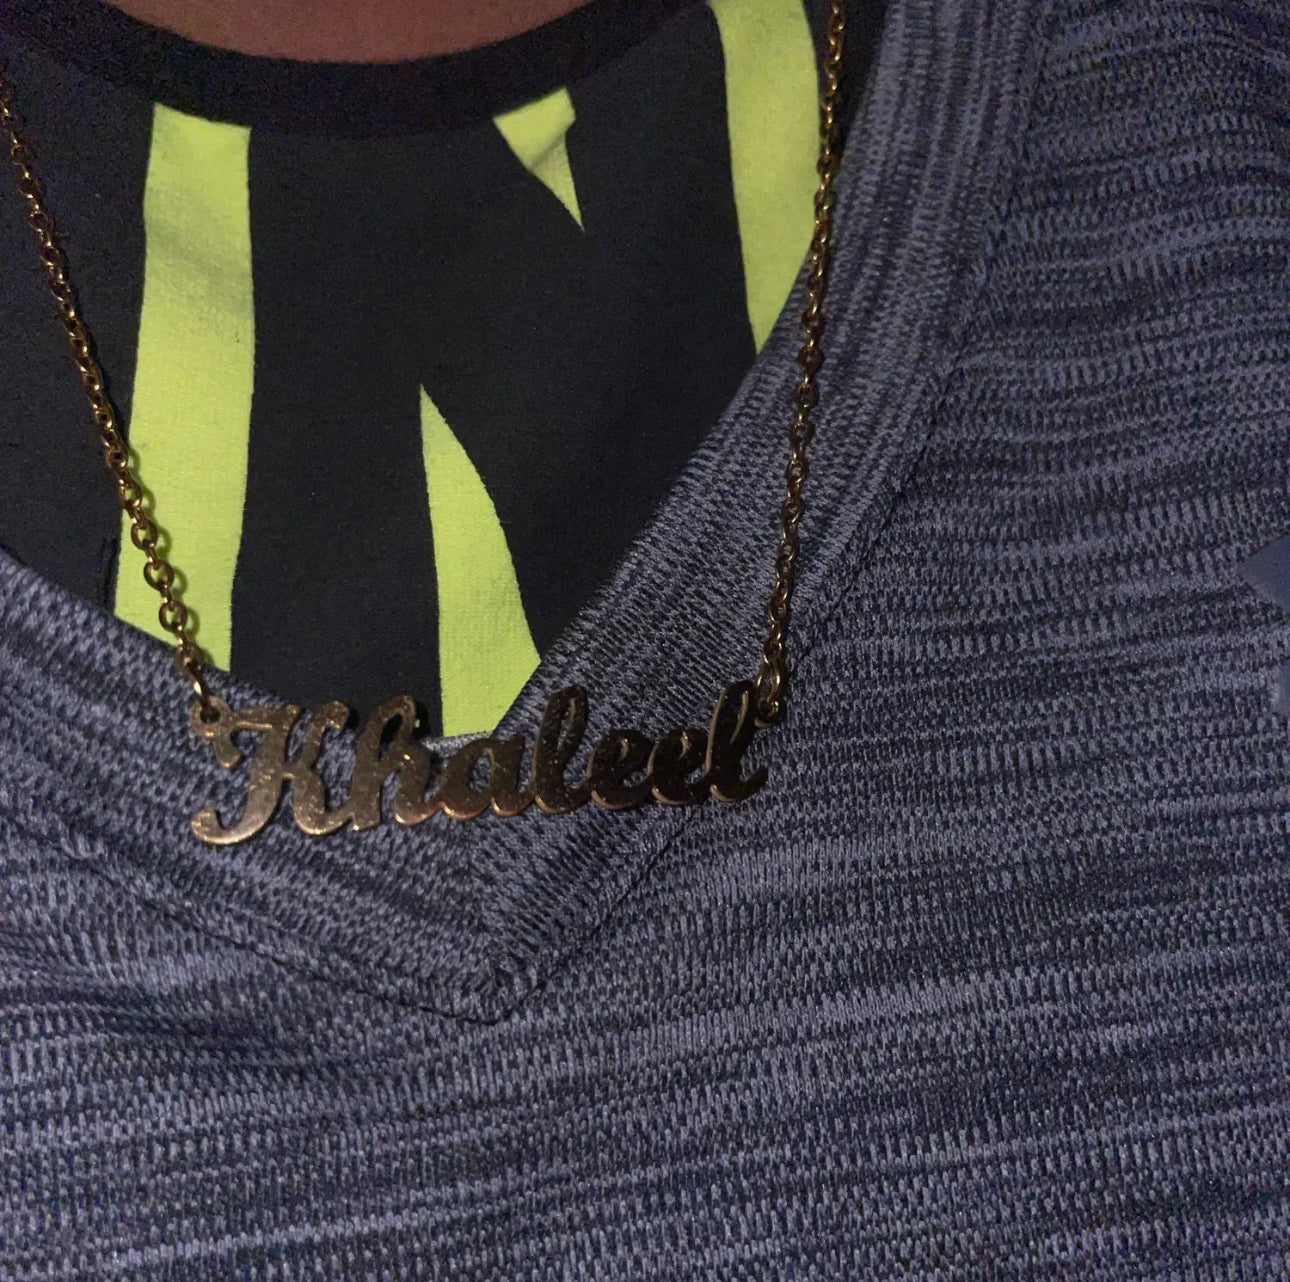 Personalized stainless steel name necklace